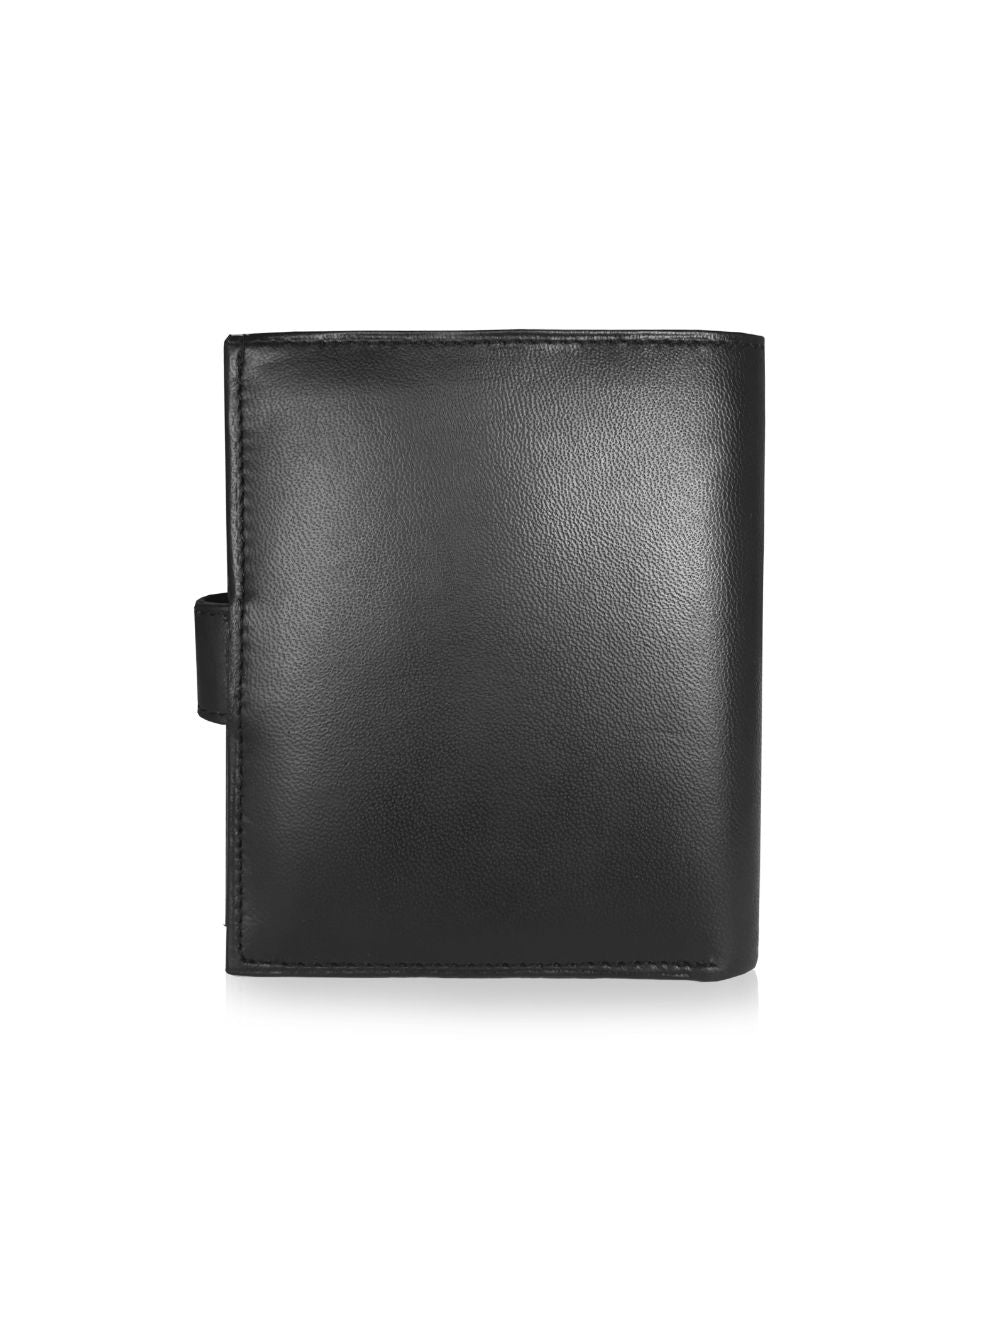 Mens Blazer Leather Wallet - Coin Pouch - 11 Credit Cards Slots - RL66